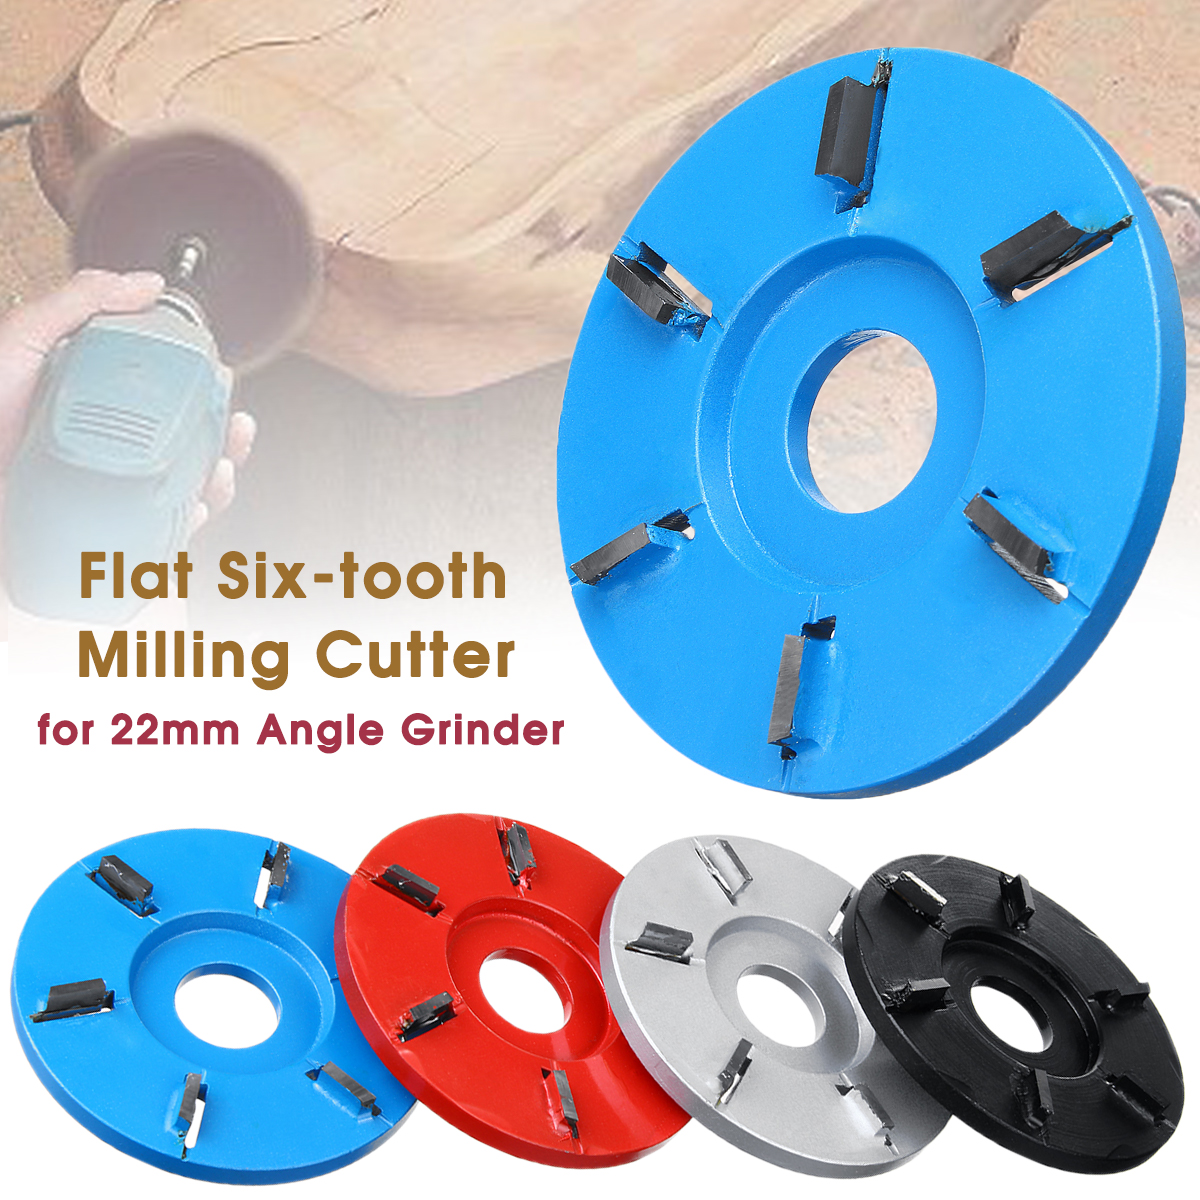 Flat 6-tooth Woodworking Plane Carving Disc Milling Cutter for Angle Grinde Tool 